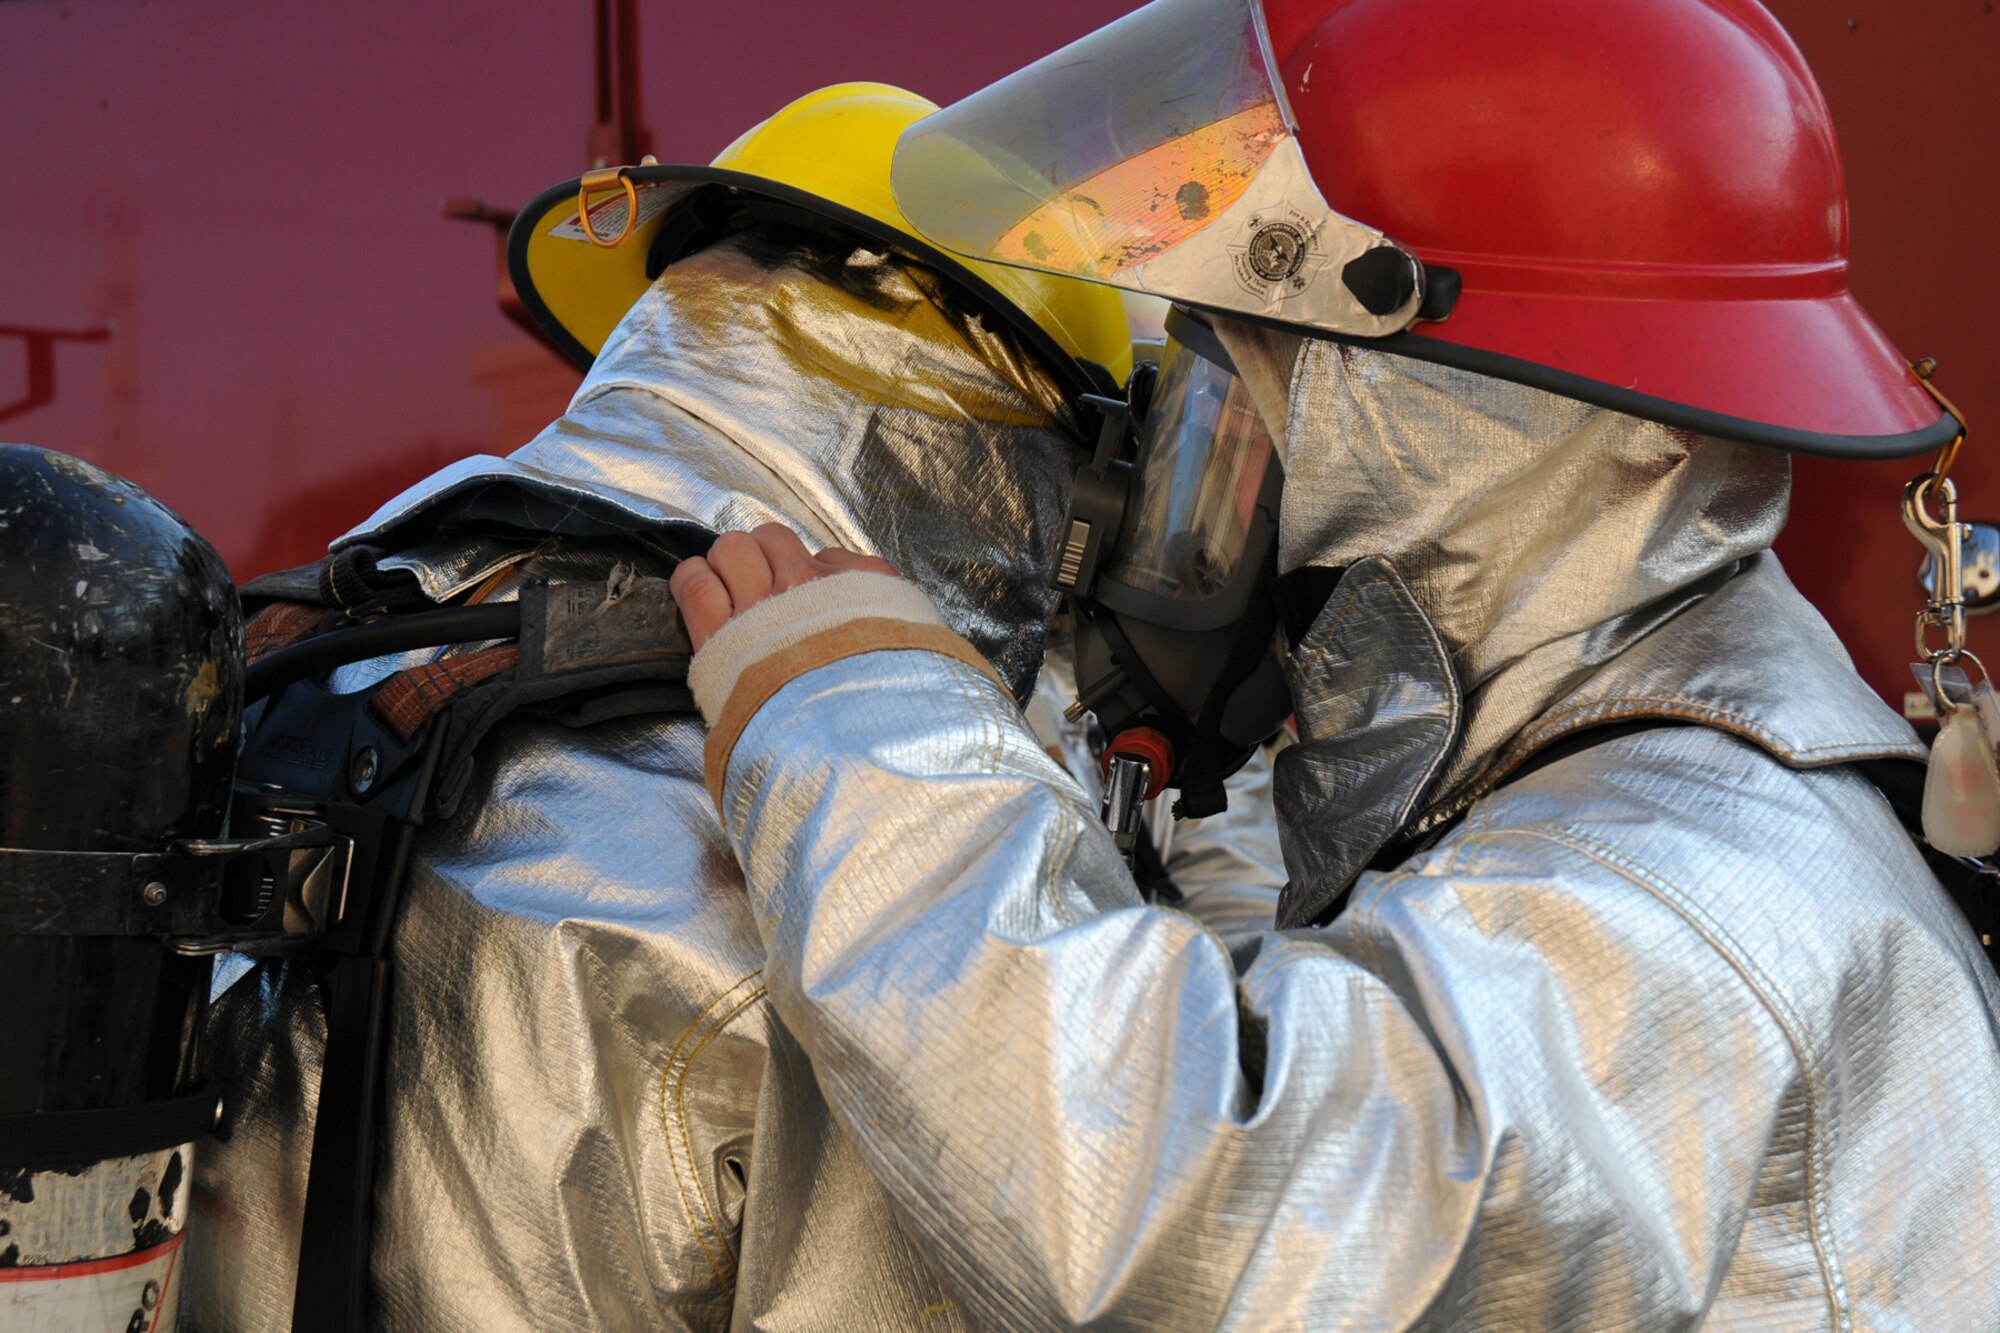 Airman 1st Class Vincent Kinard (left) and Staff Sgt. John Garcia, 18th Civil Engineering Squadron, perform buddy checks after donning their chemical gear in preparation for a simulated kitchen fire at the Silver Flag Training Facility Dec. 2 at Kadena Air Base. The 18th Wing is practicing a Local Operational Readiness Exercise to test the readiness of Kadena Airmen.  (U.S. Air Force photo/Airman 1st Class Amanda Grabiec)